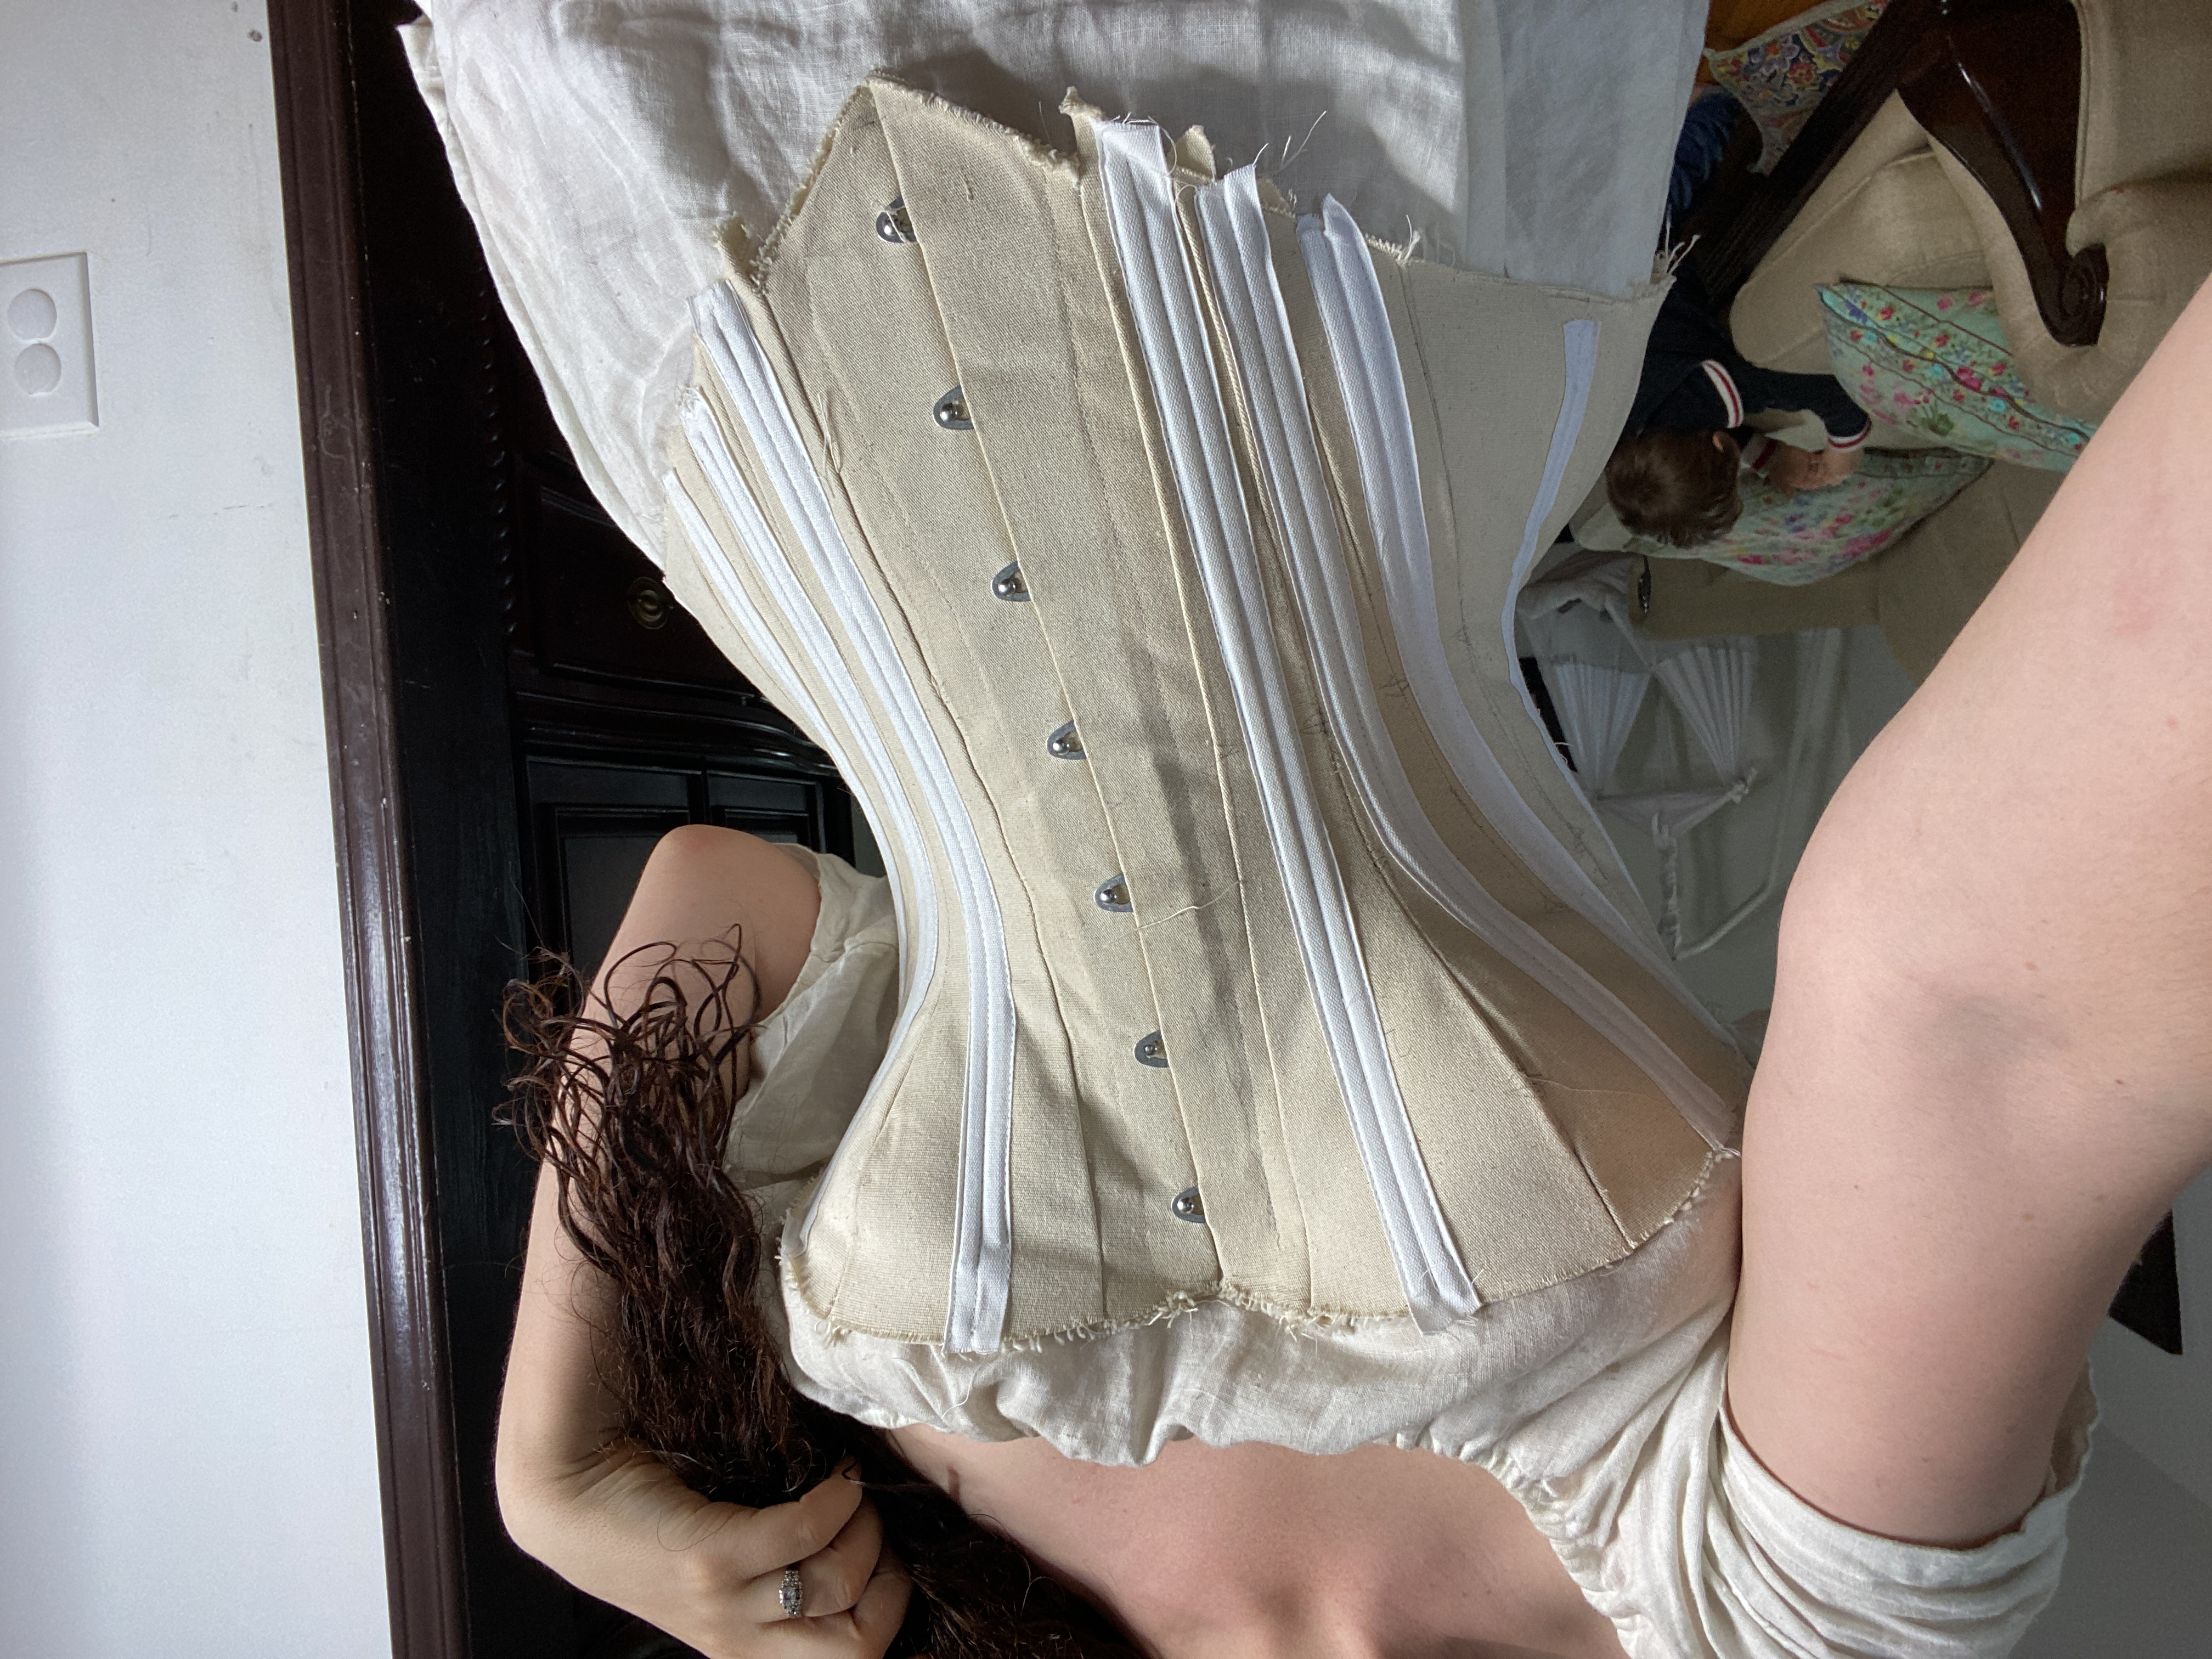 Conical Victorian Corset Student Work Registration is still on